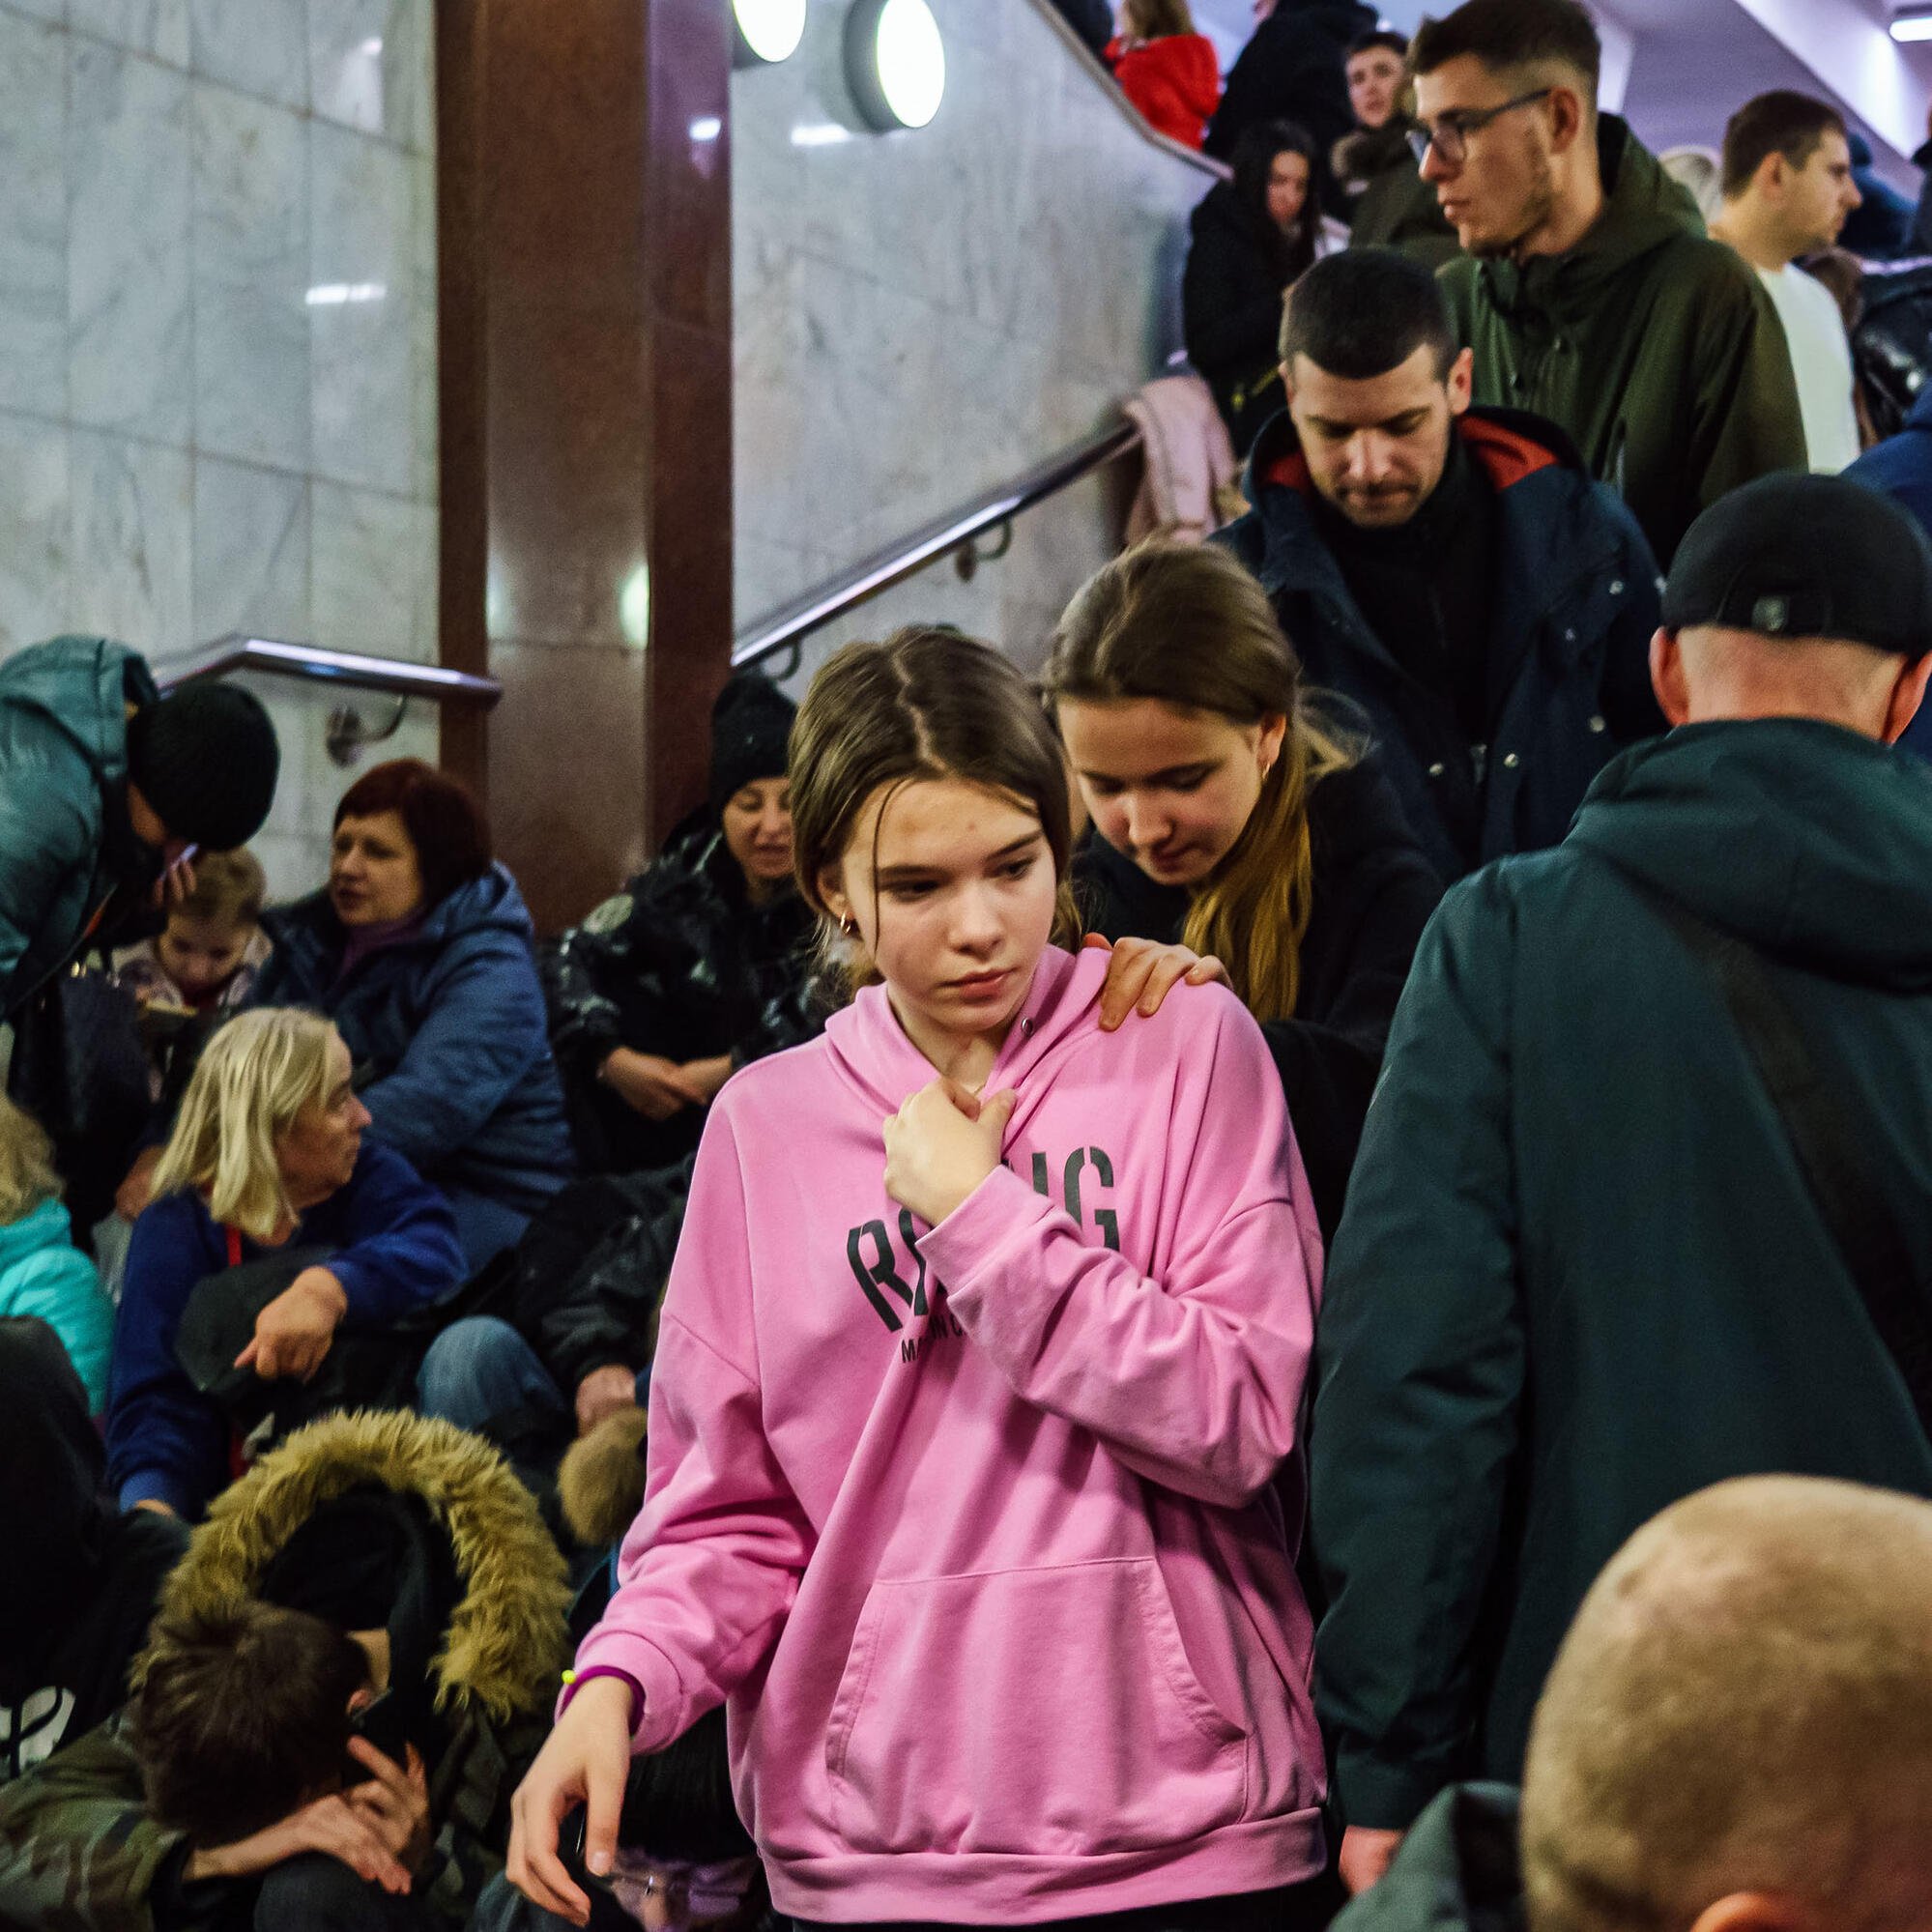 Hundreds of people seek shelter underground, on the platform, inside the dark train cars, and even in the emergency exits, in metro subway station as the Russian invasion of Ukraine continues, in Kharkiv, Ukraine.